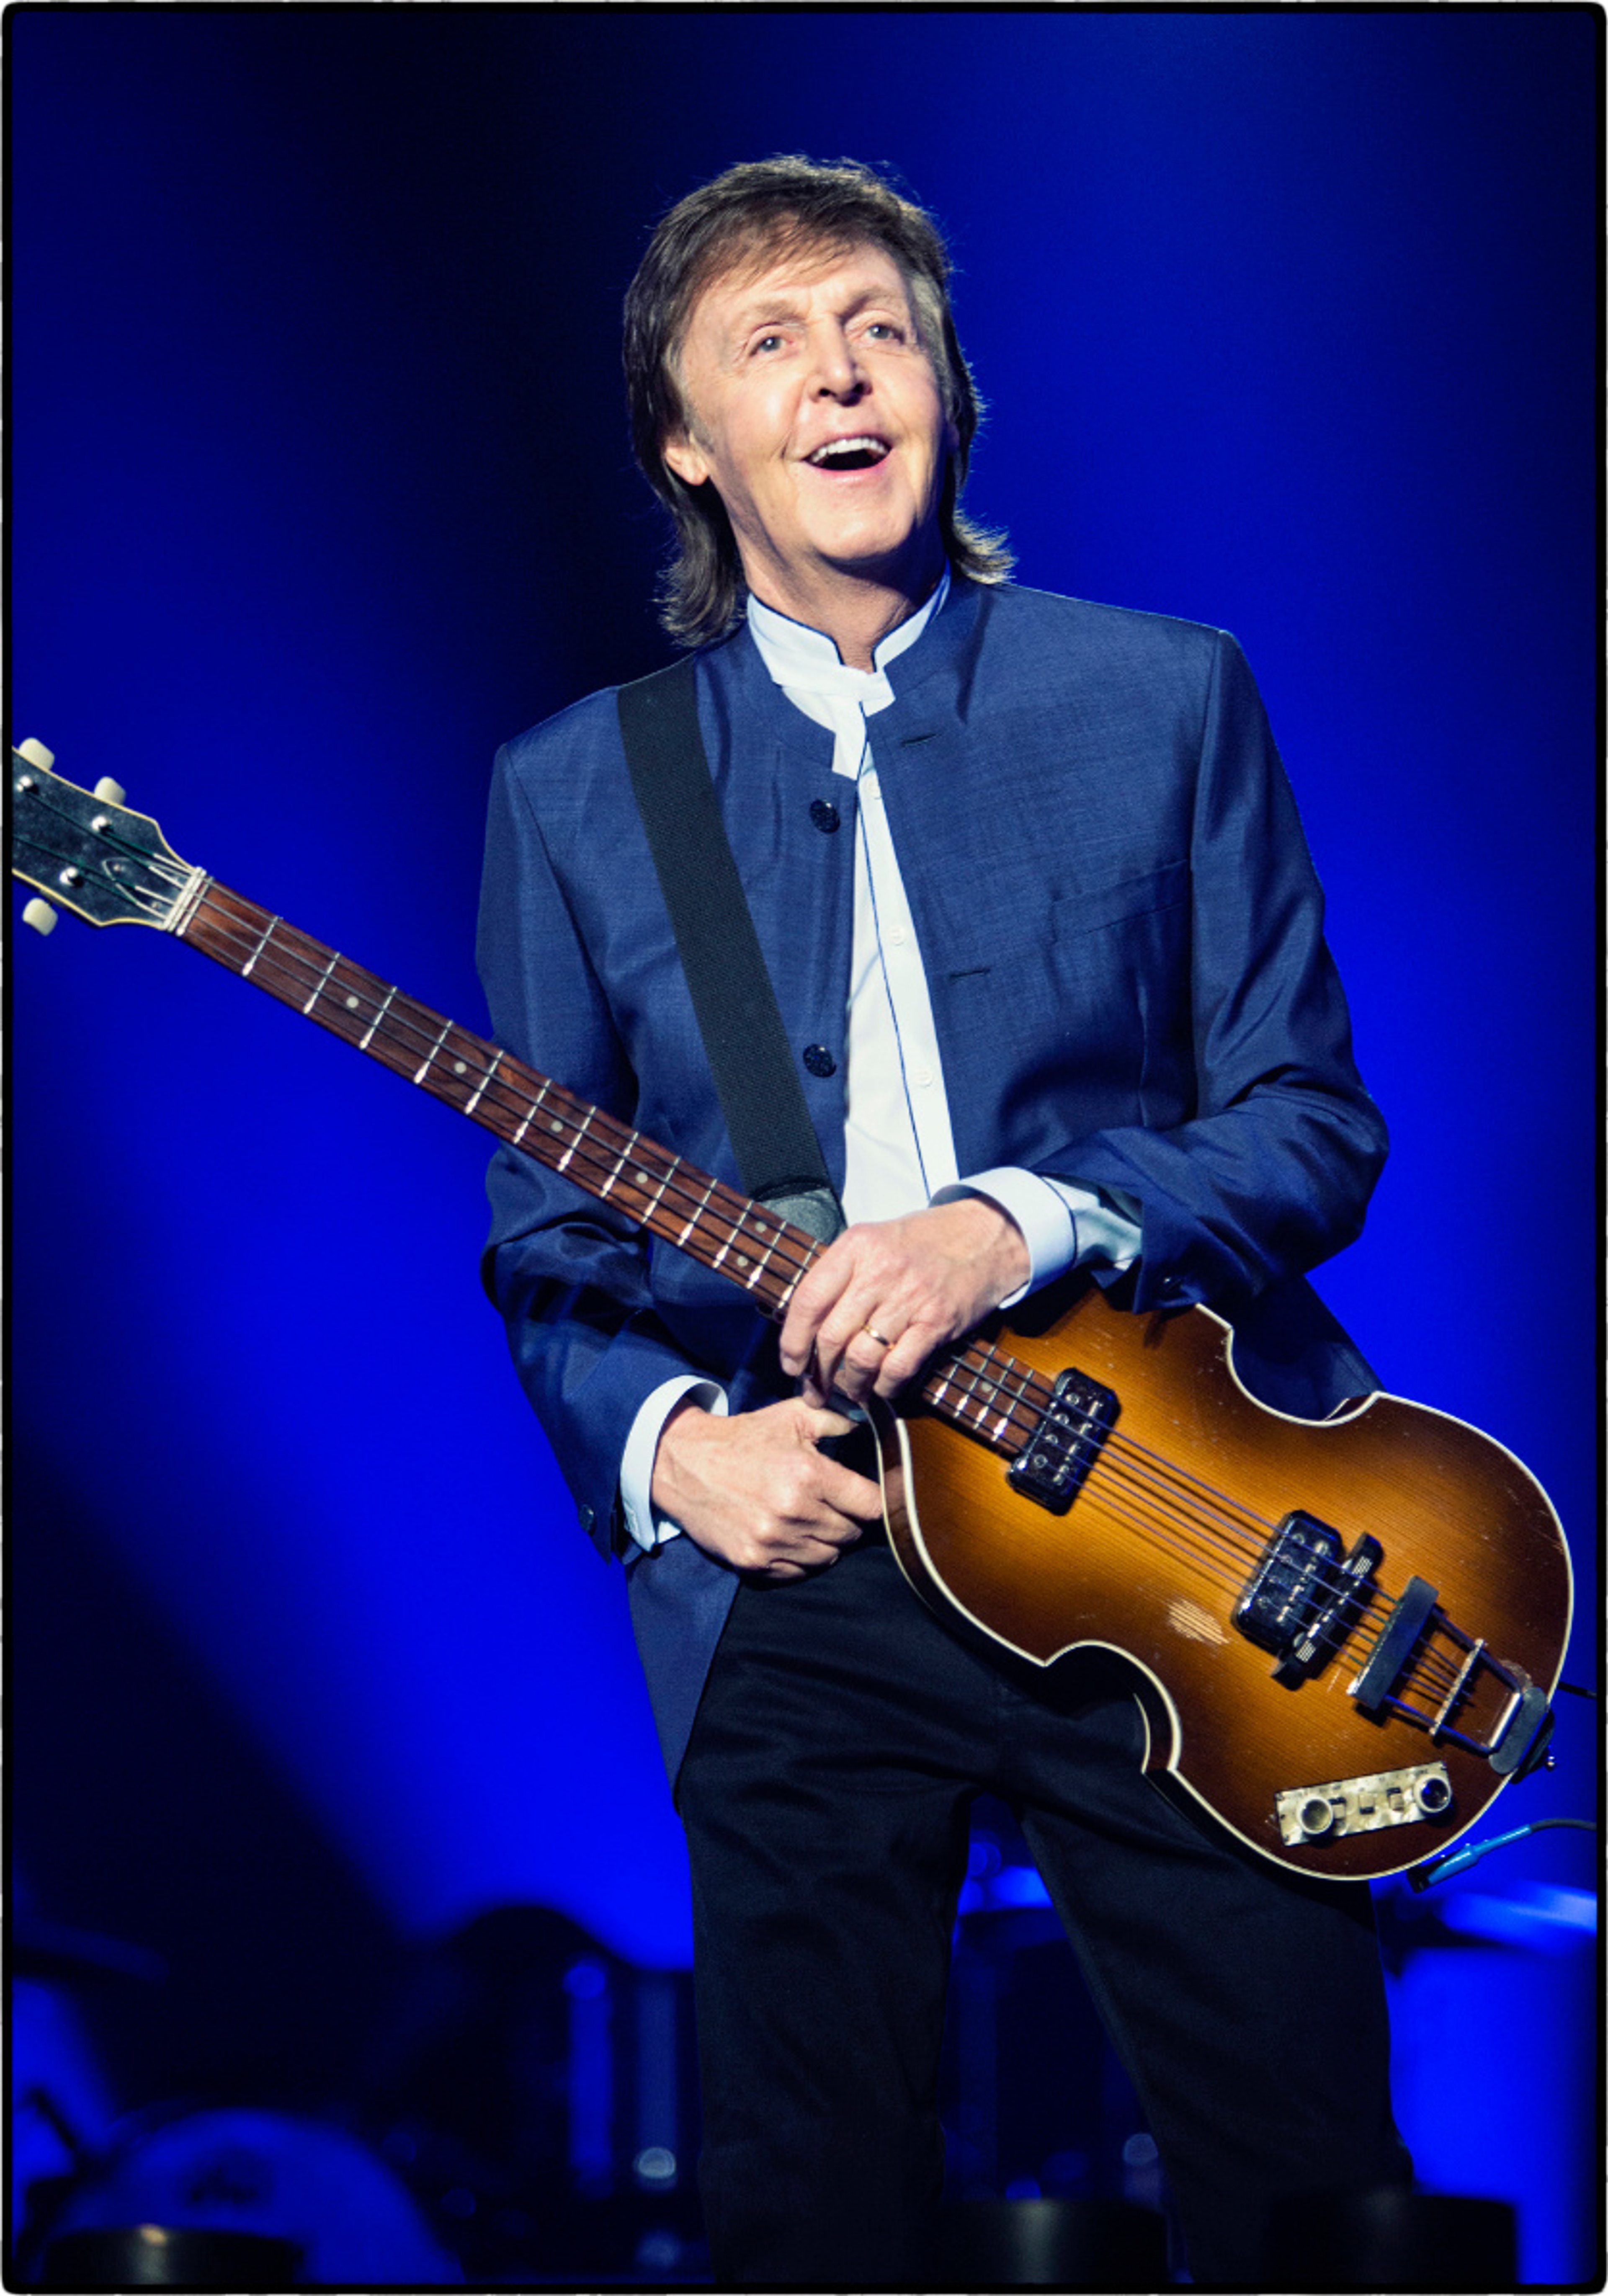 Opening Night of Paul's 'One On One' tour at Save Mart Center, Fresno 